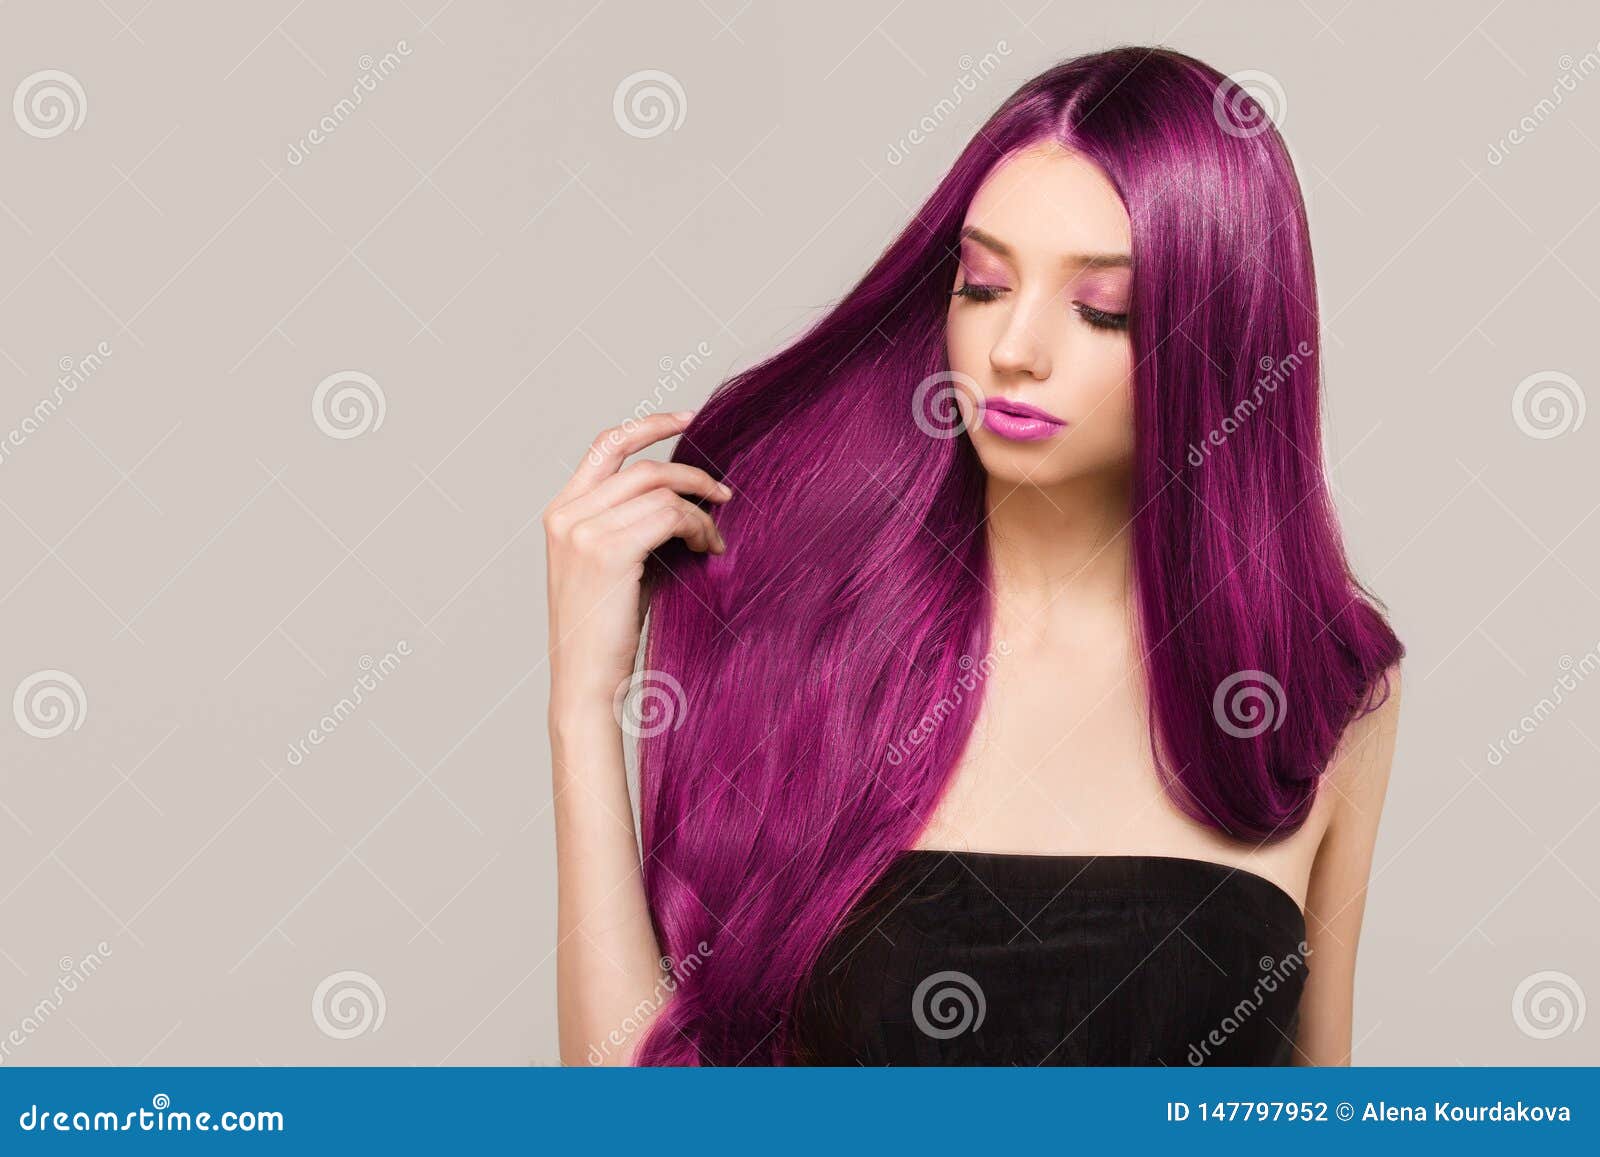 Woman with Purple Bright Hair Color. Shades of Pink. Straight Shiny Hair  Stock Photo - Image of gray, hairstyle: 147797952